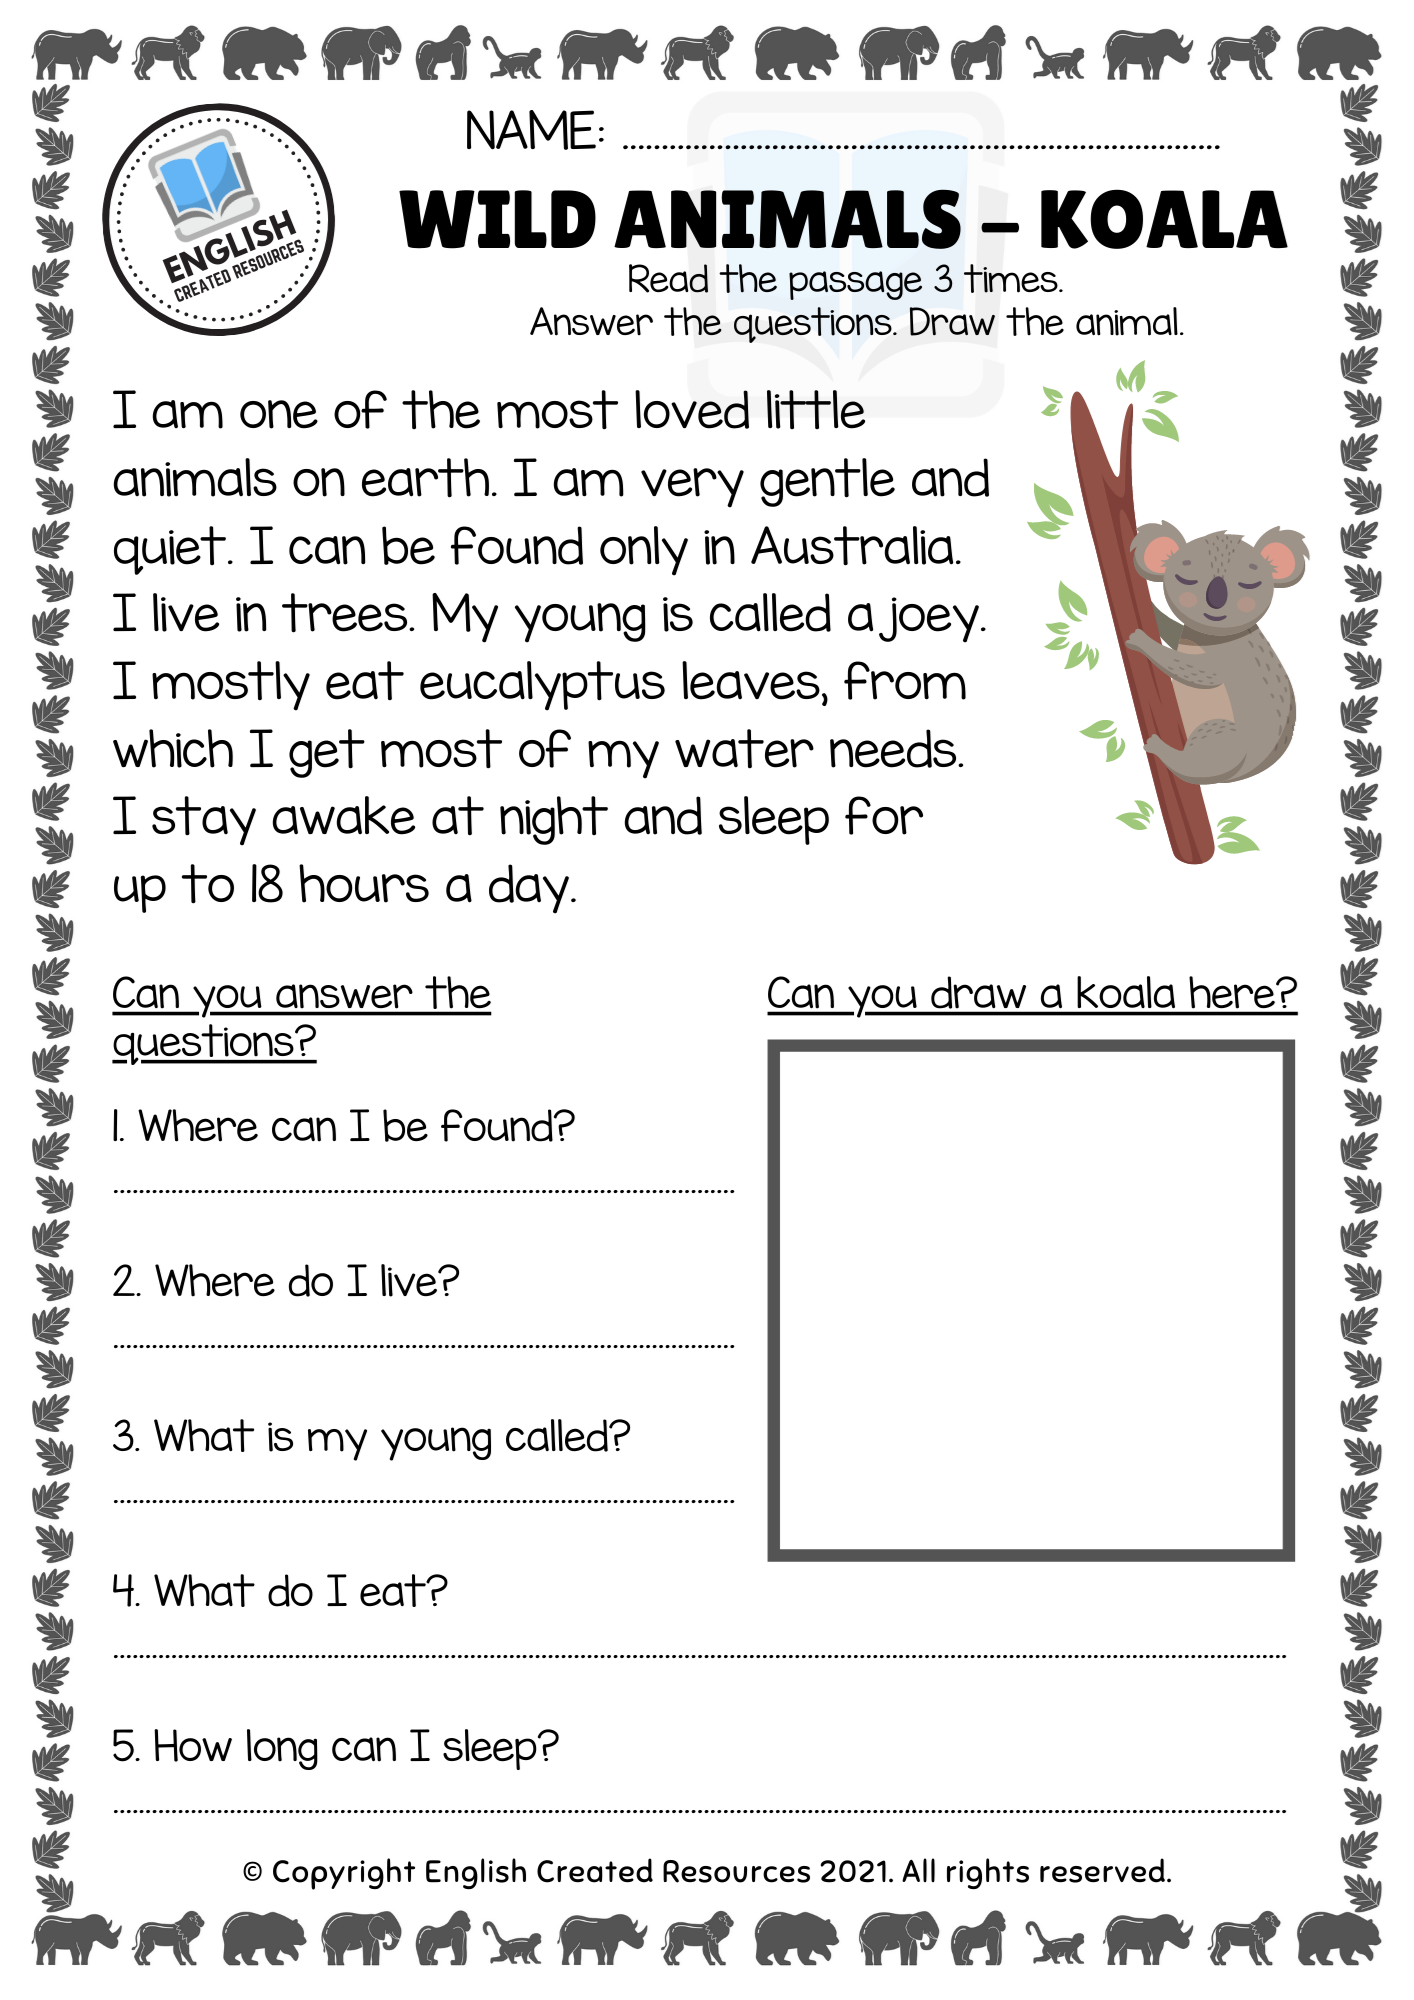 wild animals reading comprehension worksheets english created resources